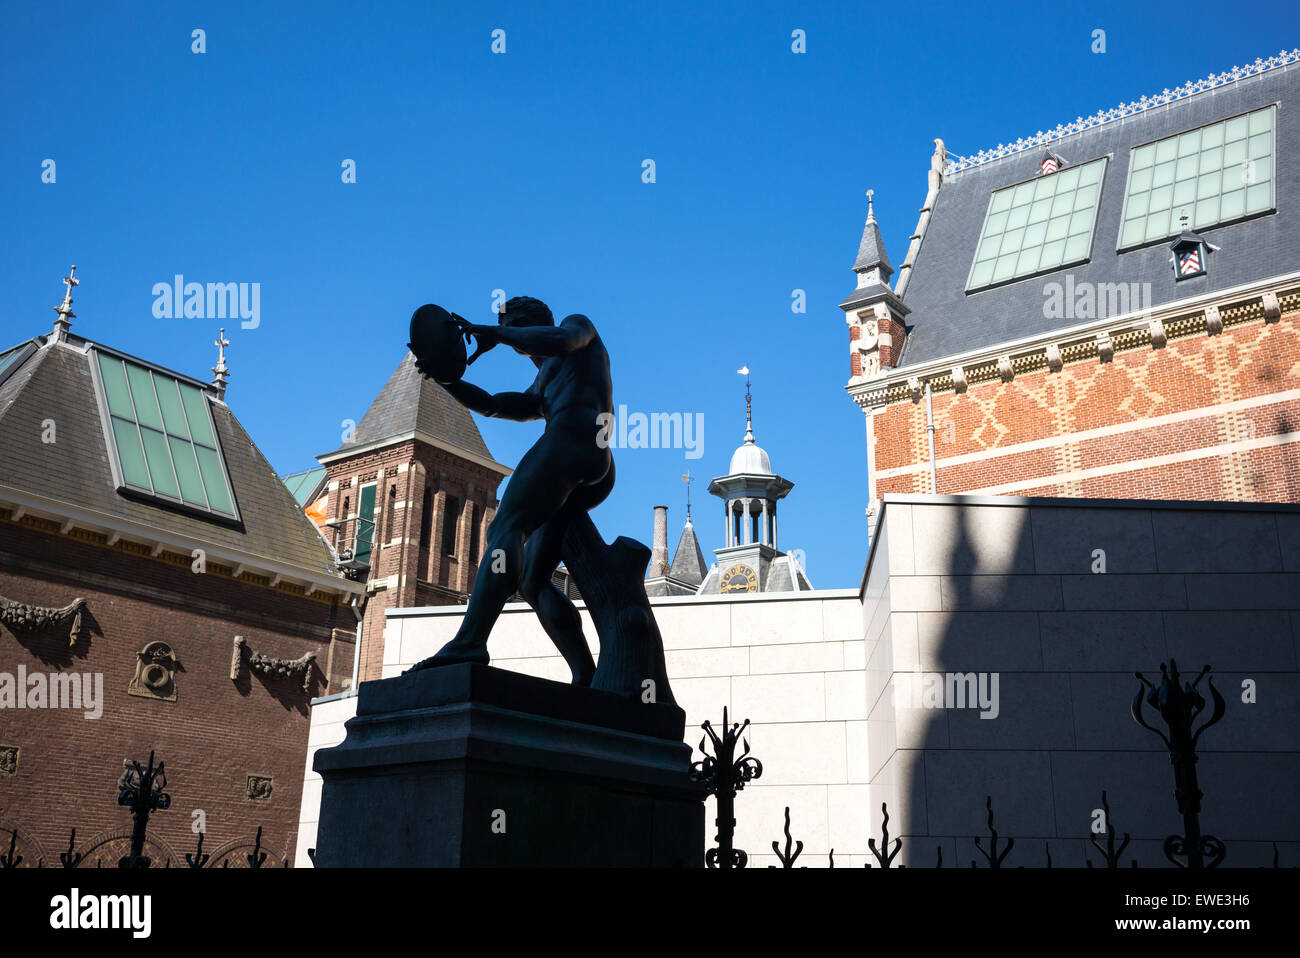 Amsterdam, the statue of a discus thrower in  the Rijksmuseum courtyard Stock Photo